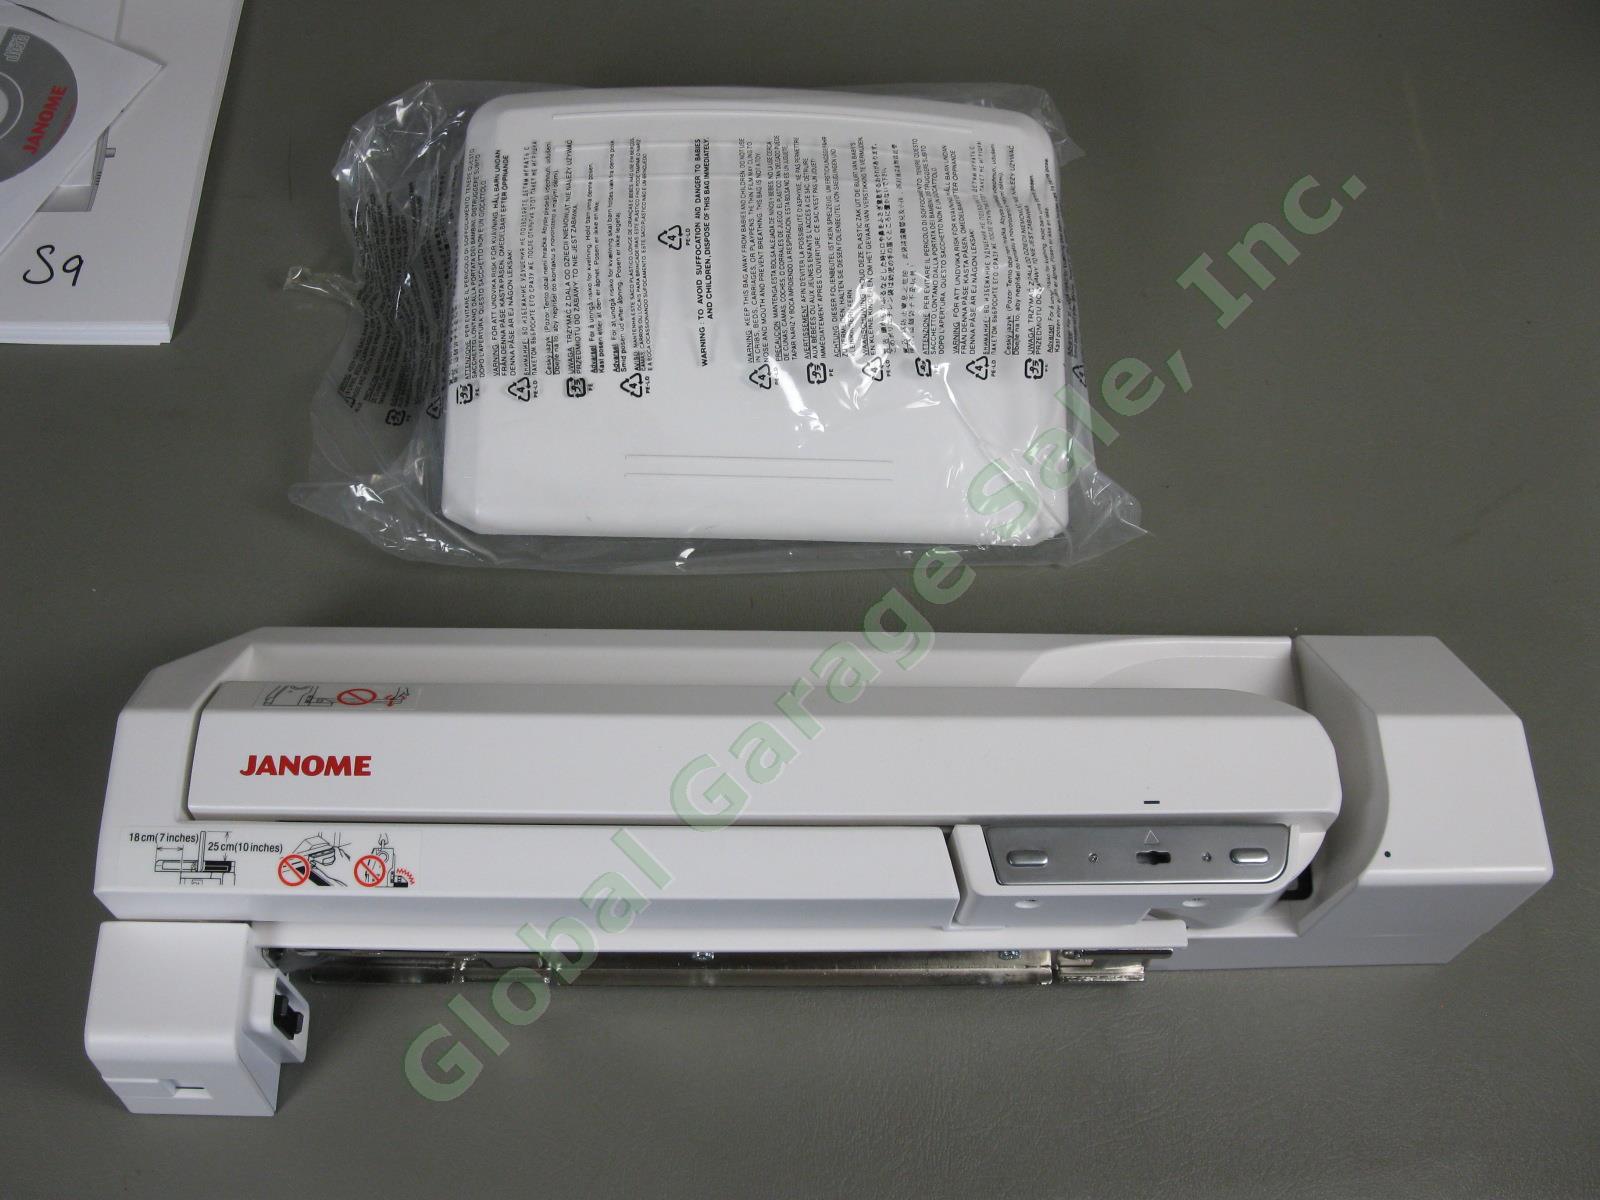 Janome Skyline S9 Sewing + Embroidery Machine Mint Condition! Barely Used! 11